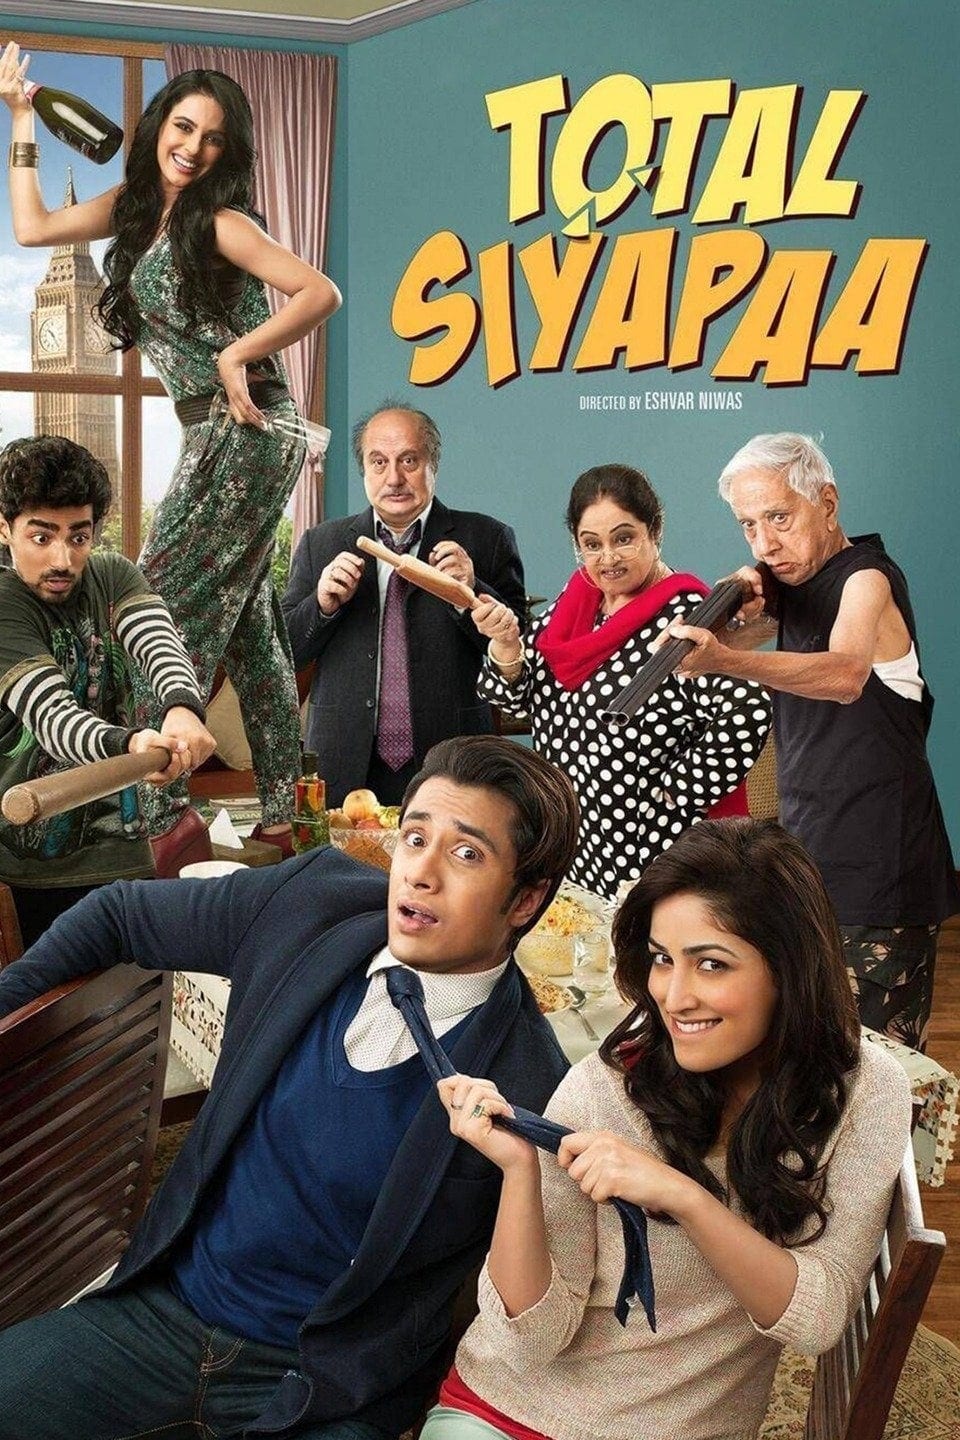 Poster for the movie "Total Siyapaa"